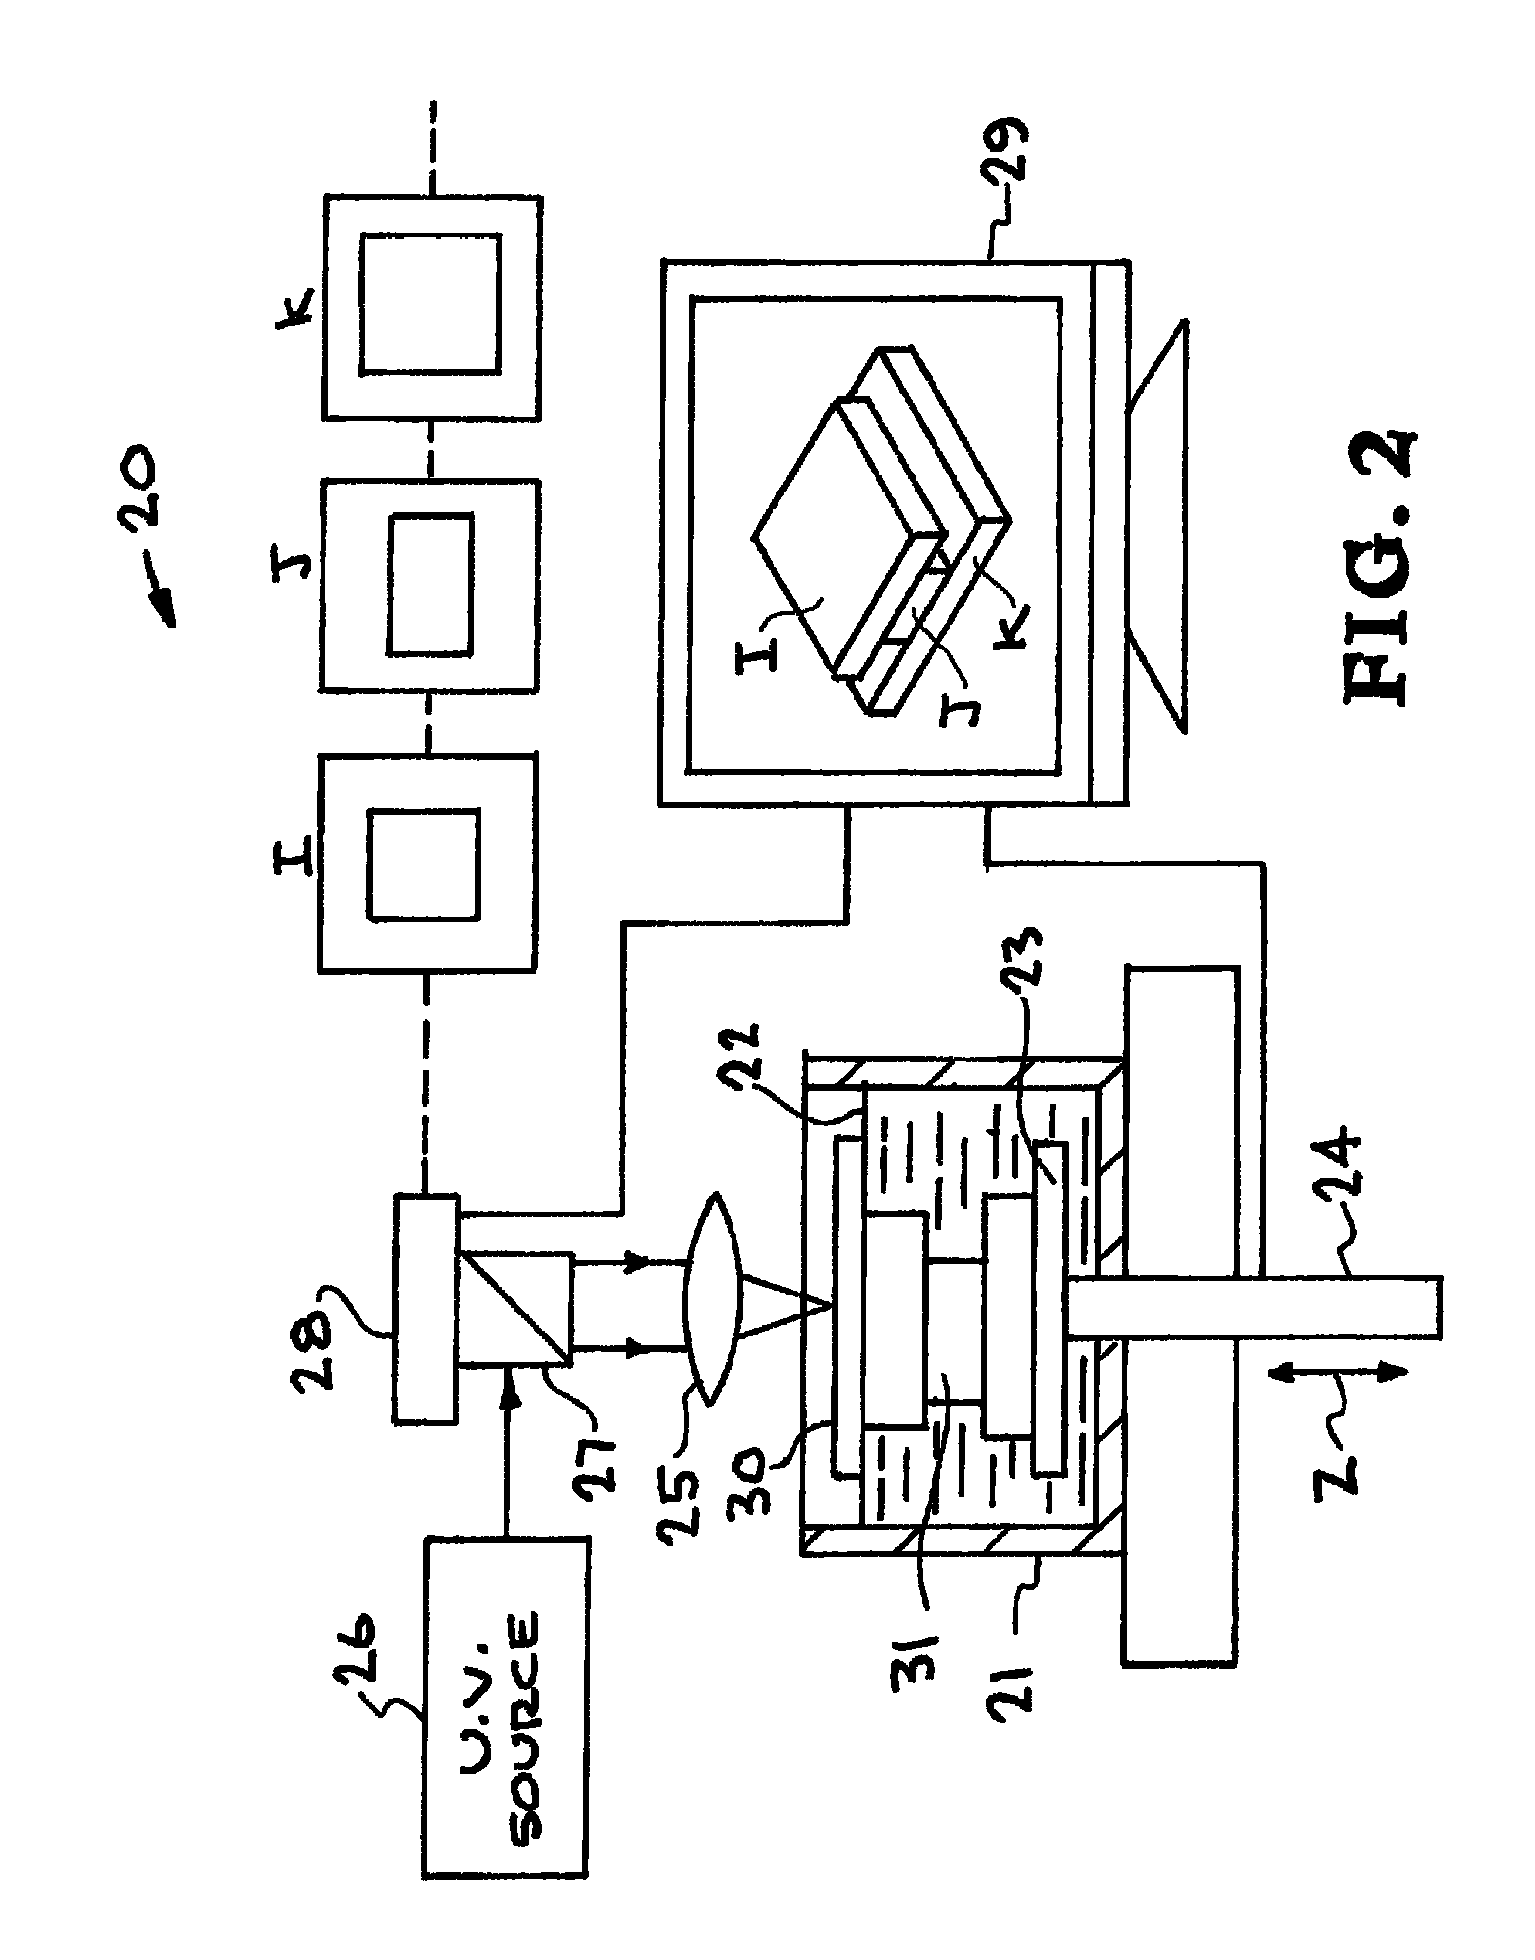 High resolution projection micro stereolithography system and method